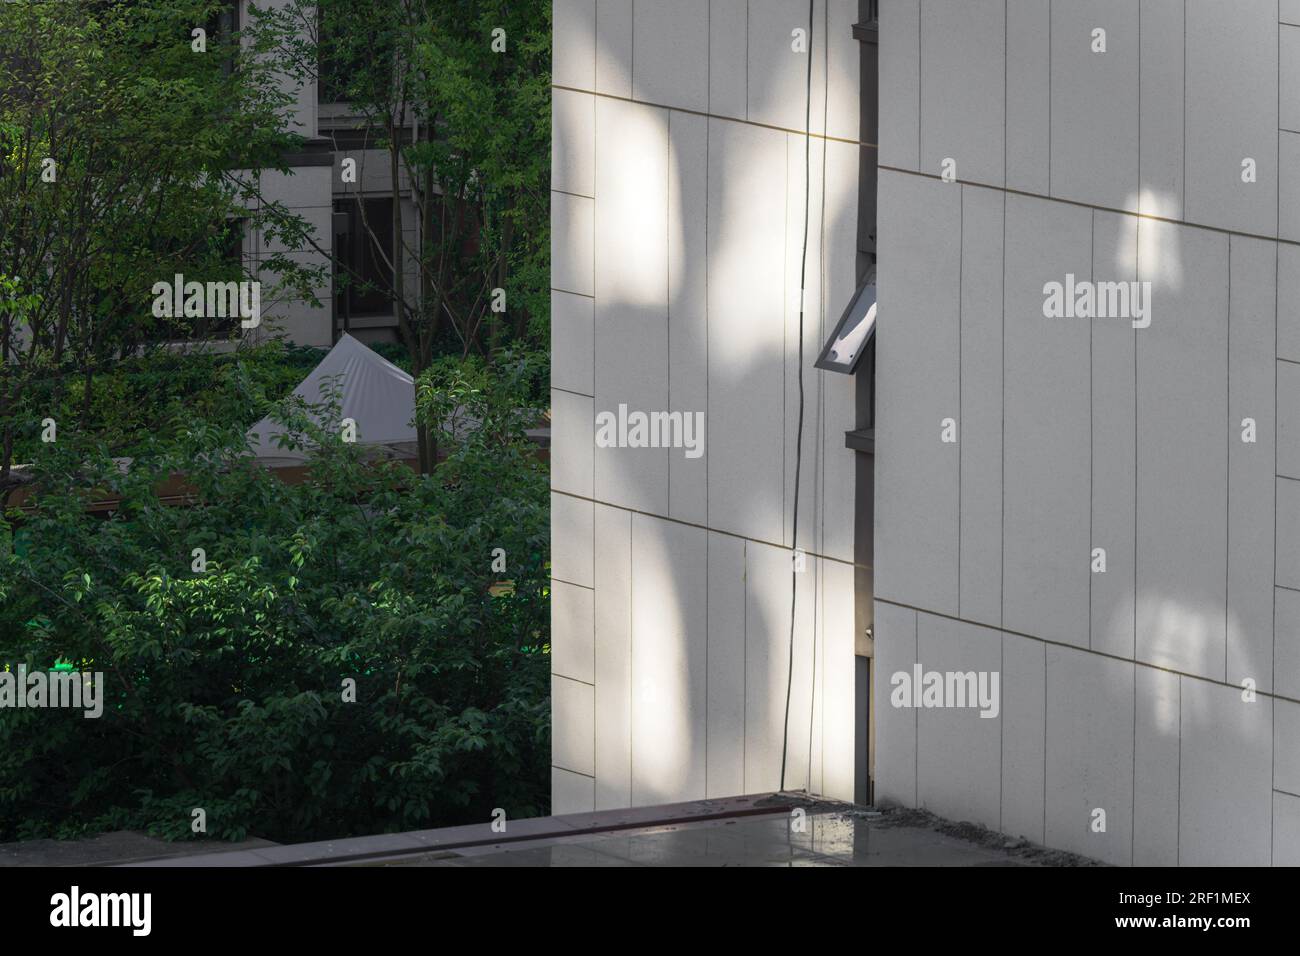 The sunlight shining on the apartment building. Stock Photo